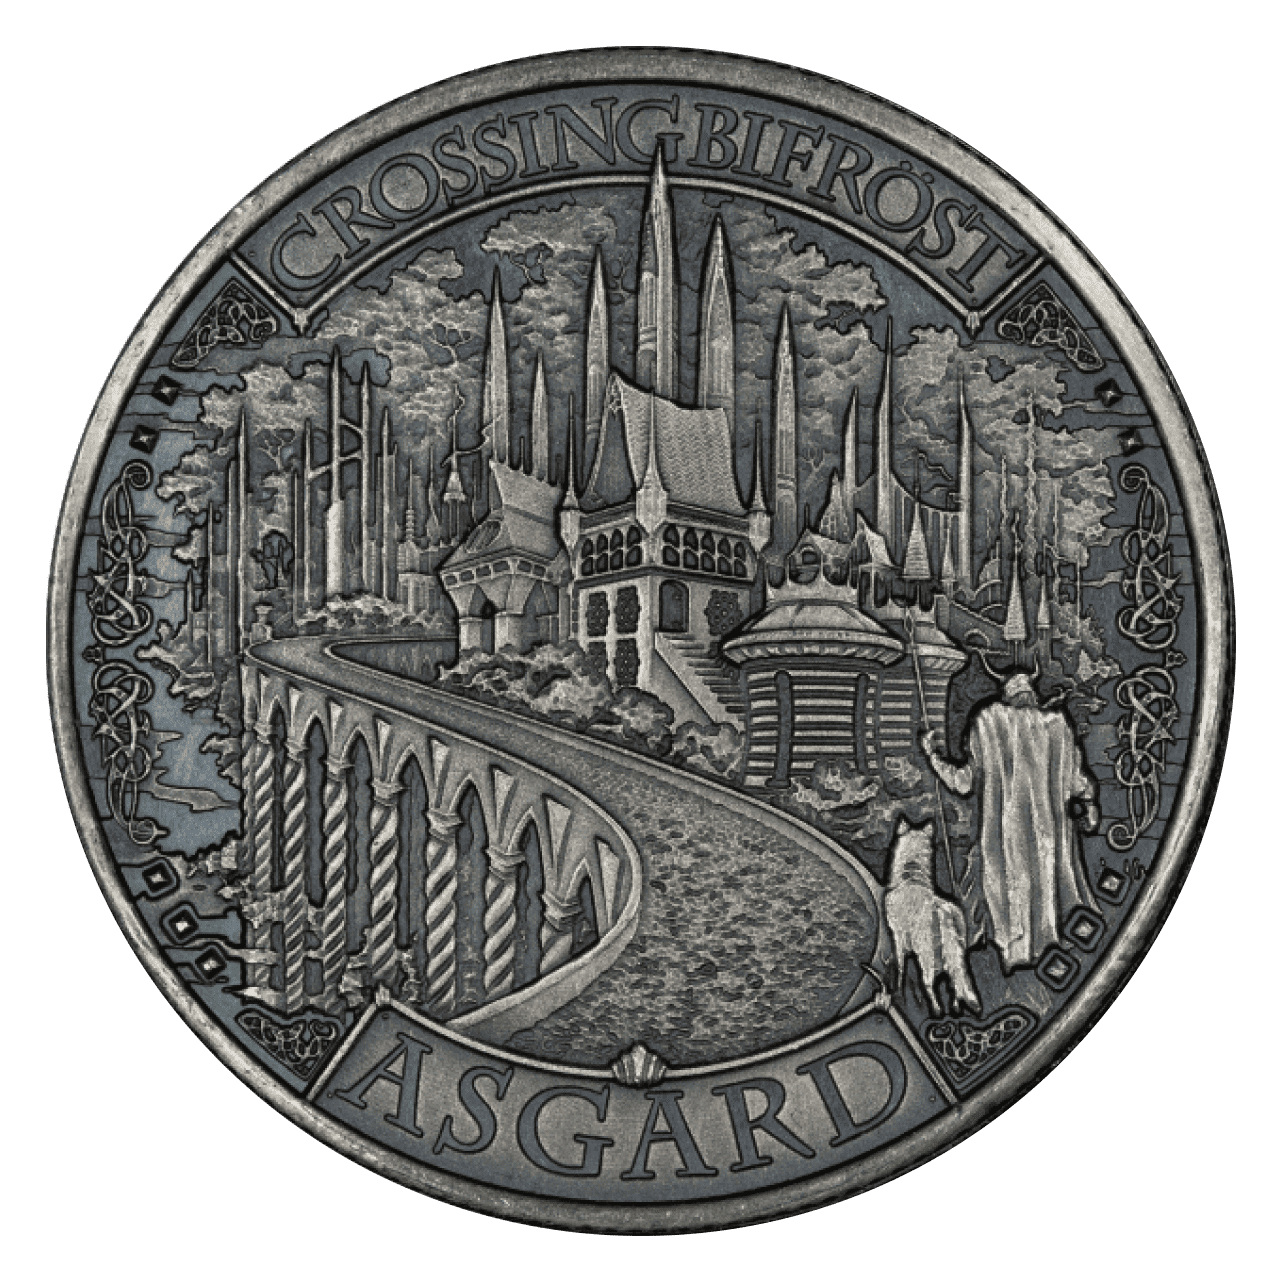 Asgard 1 oz Silver Round - Antique Finish Mythical Cities Series